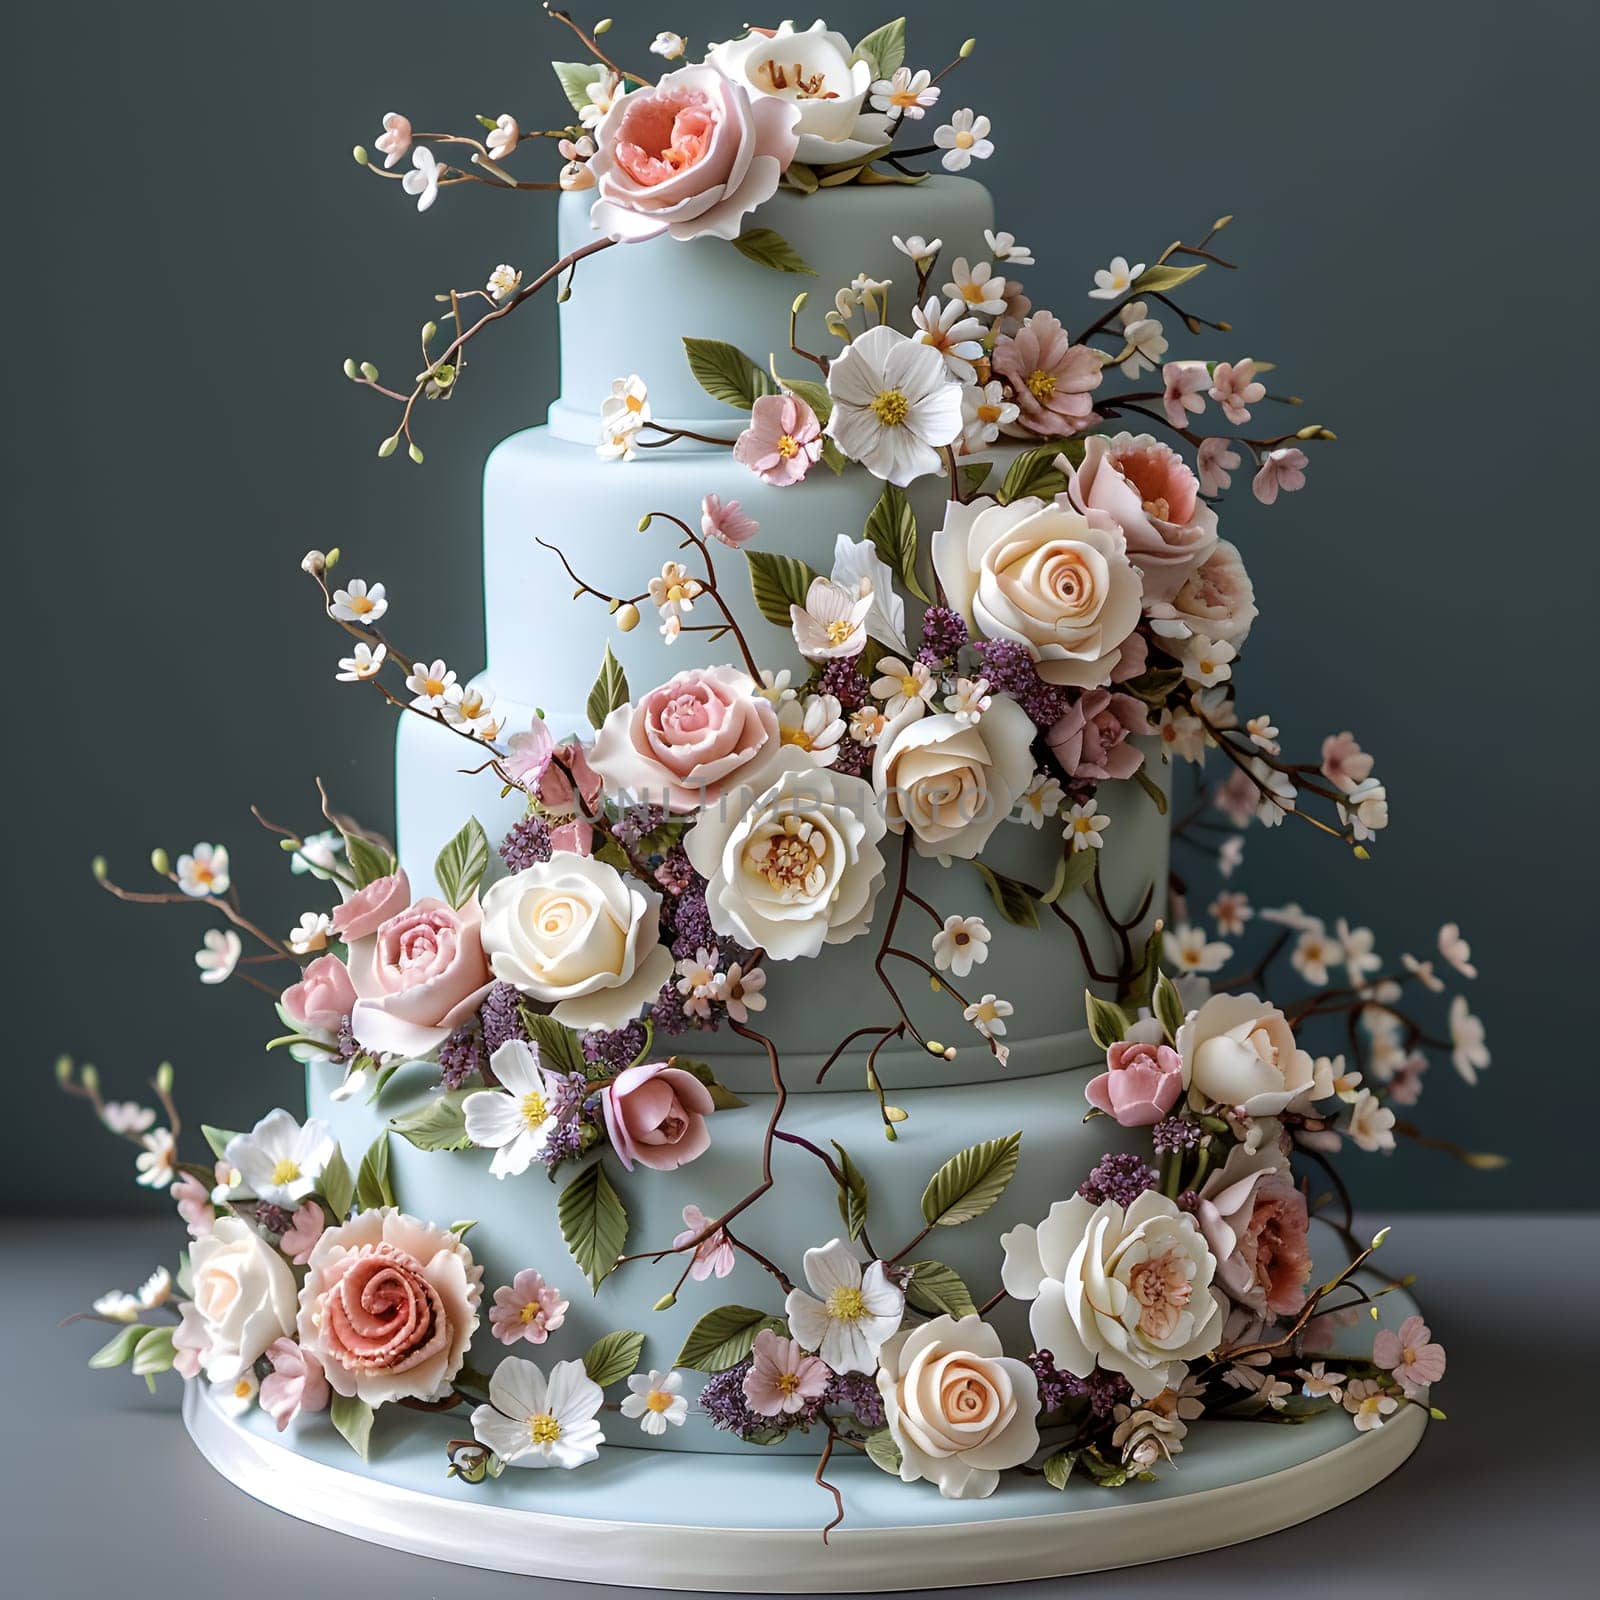 Wedding cake adorned with pink hybrid tea rose flowers sits on table by Nadtochiy